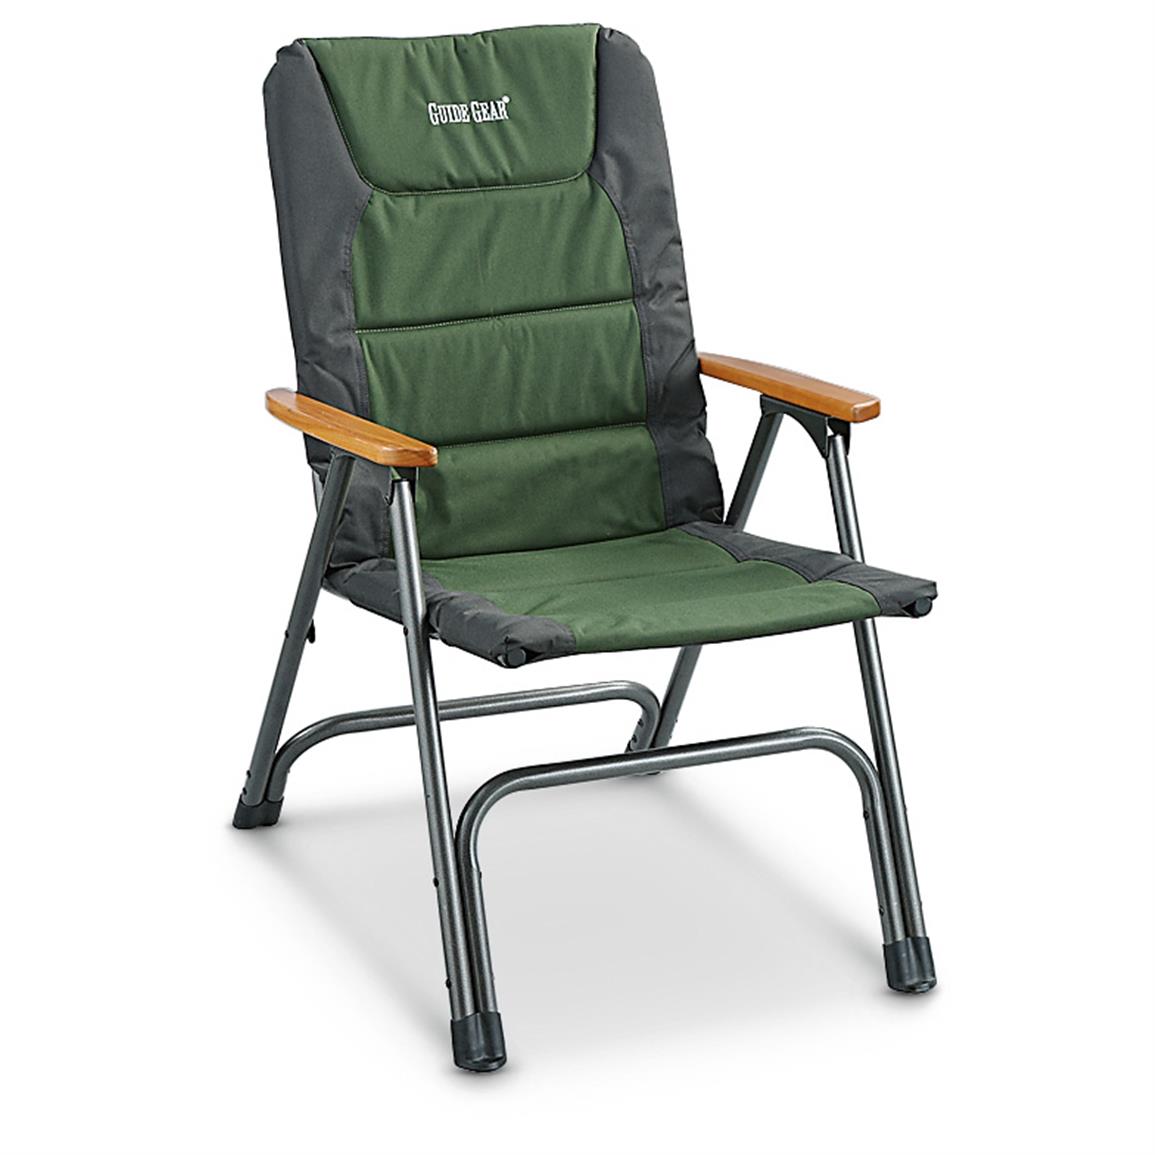 Guide Gear XL Padded Deck Chair, 300 lb. Capacity - 581523 ...